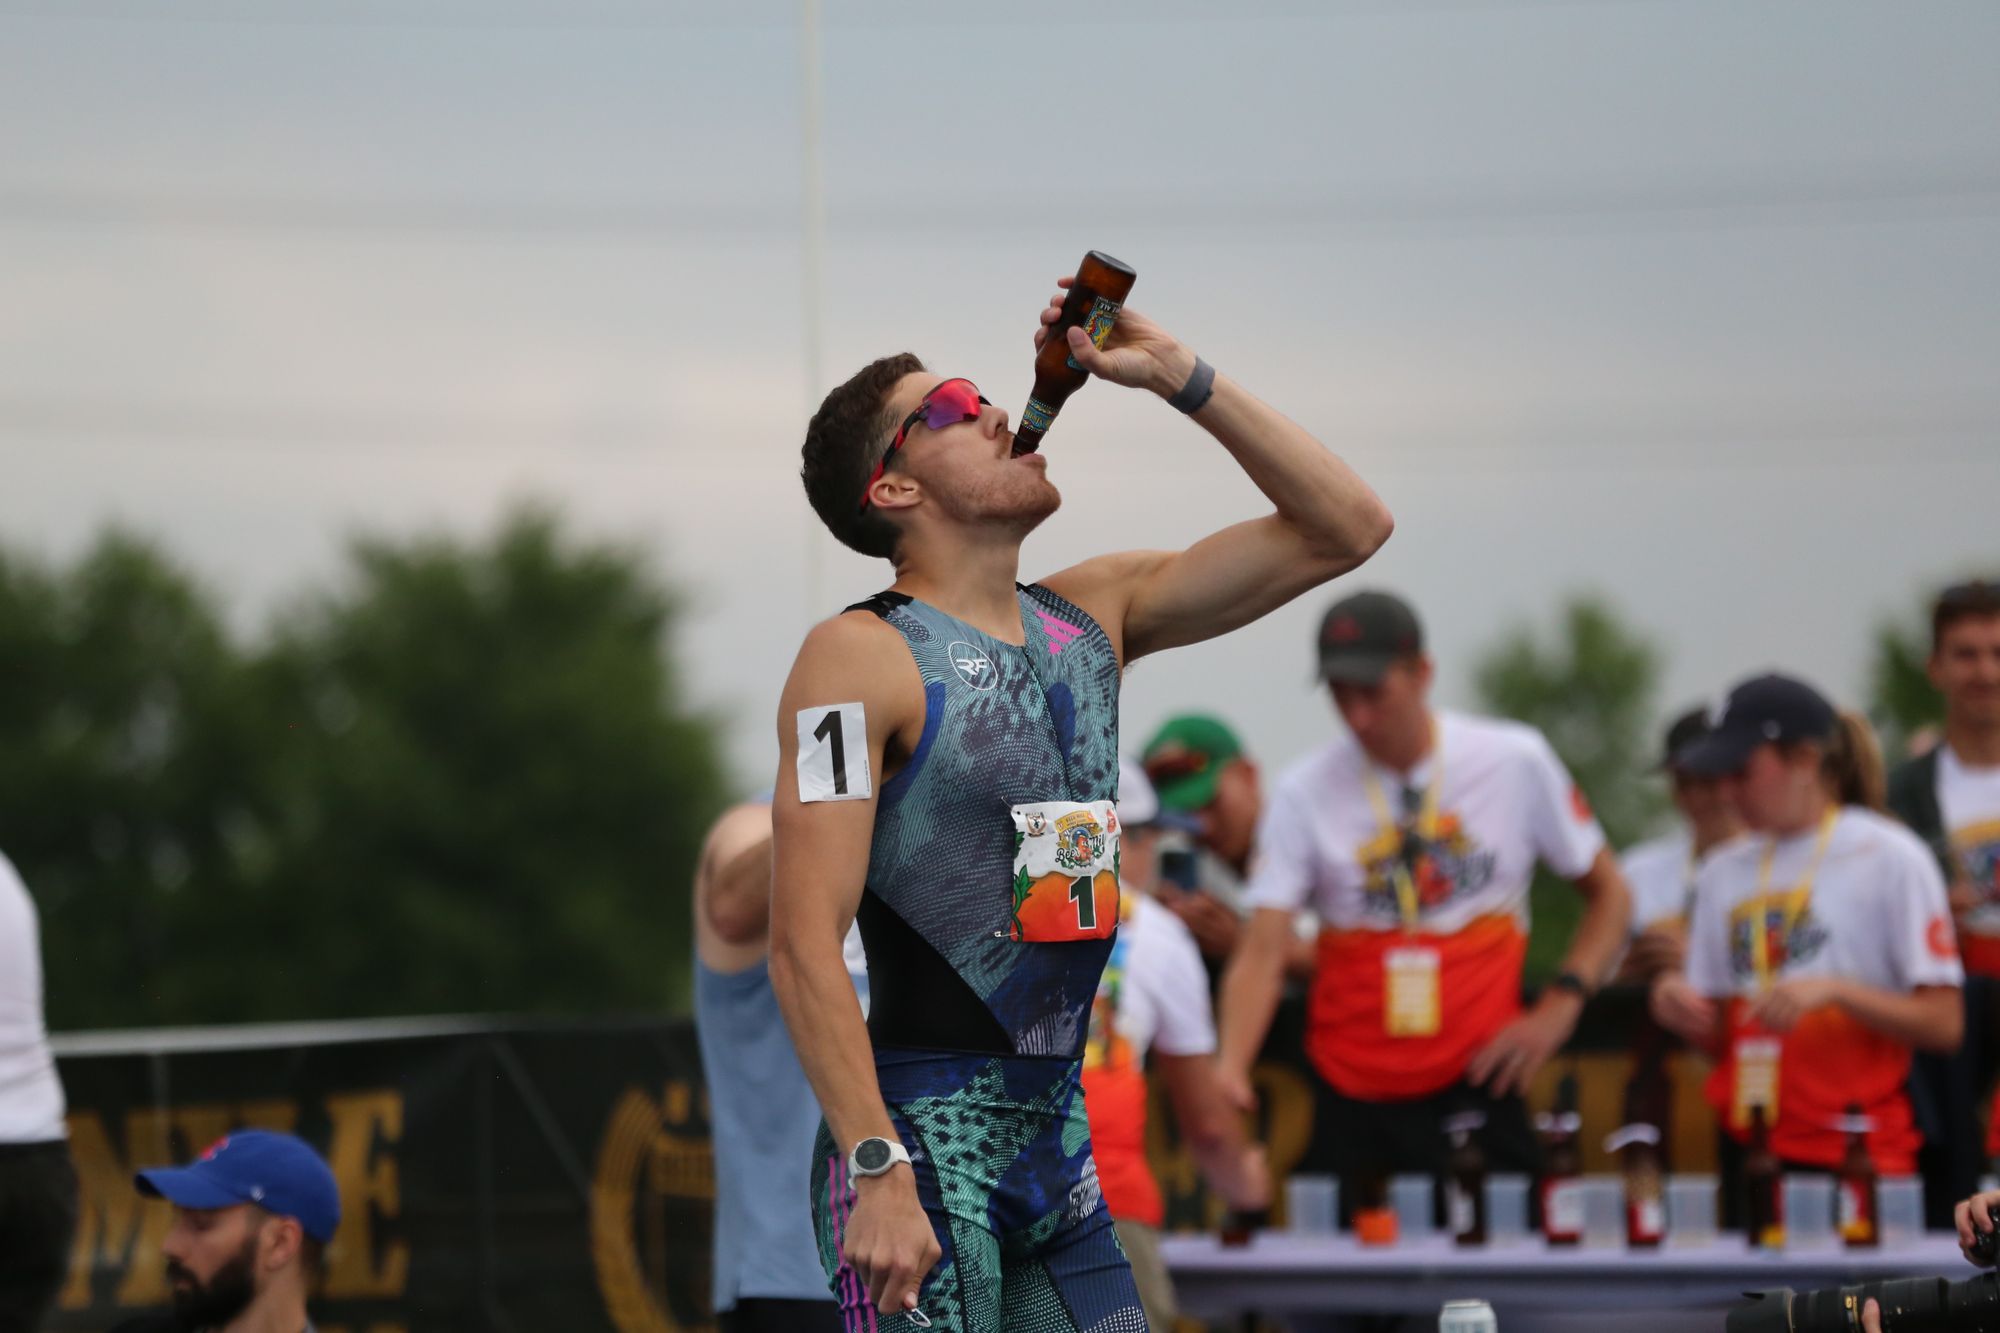 Corey Bellemore at the 2023 Beer Mile World Classic